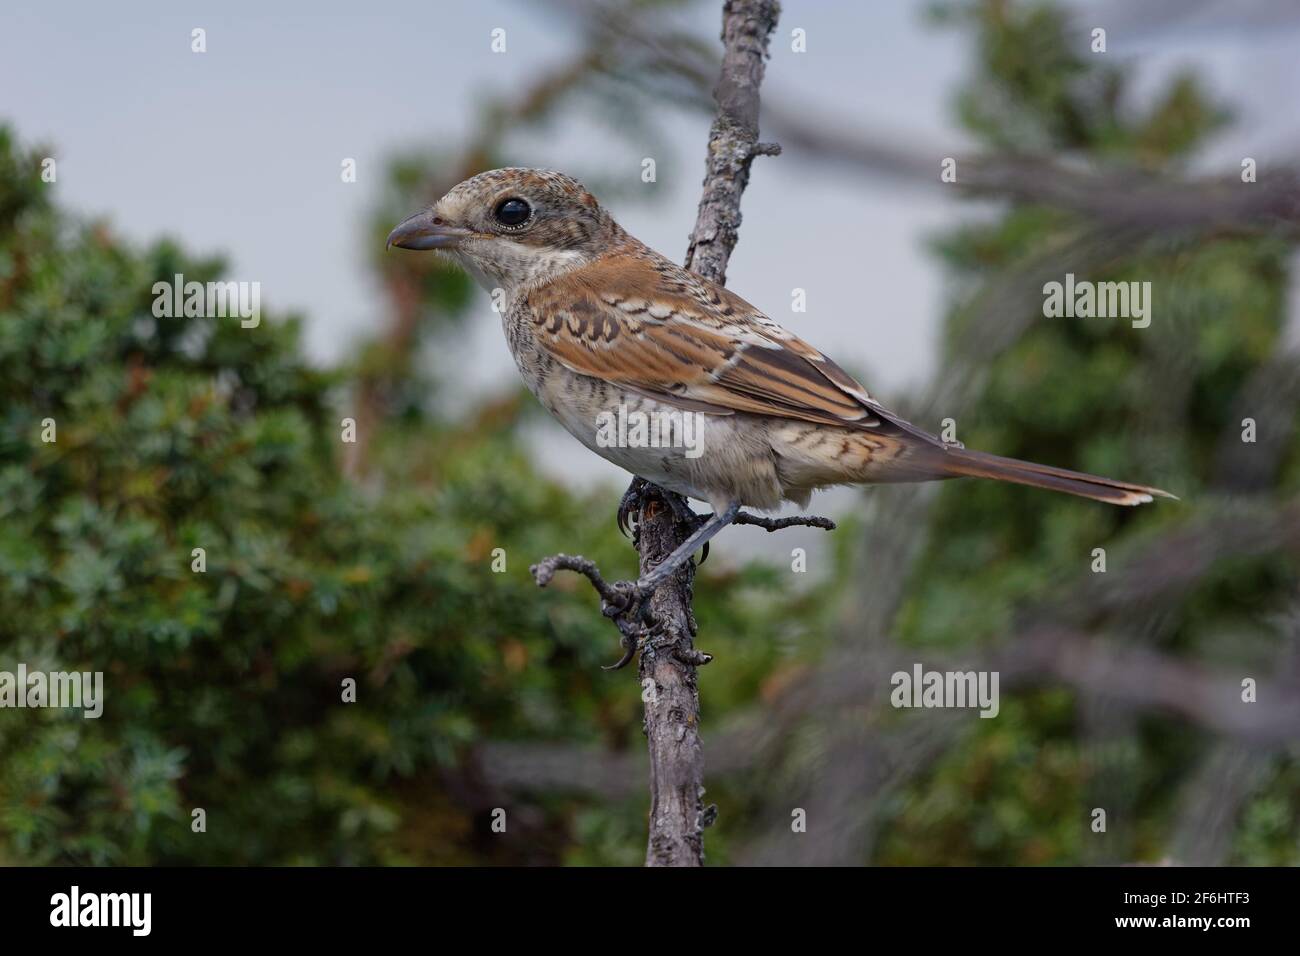 Juvenile Red-backed Shrike (Lanius collurio) perched on a branch Stock Photo